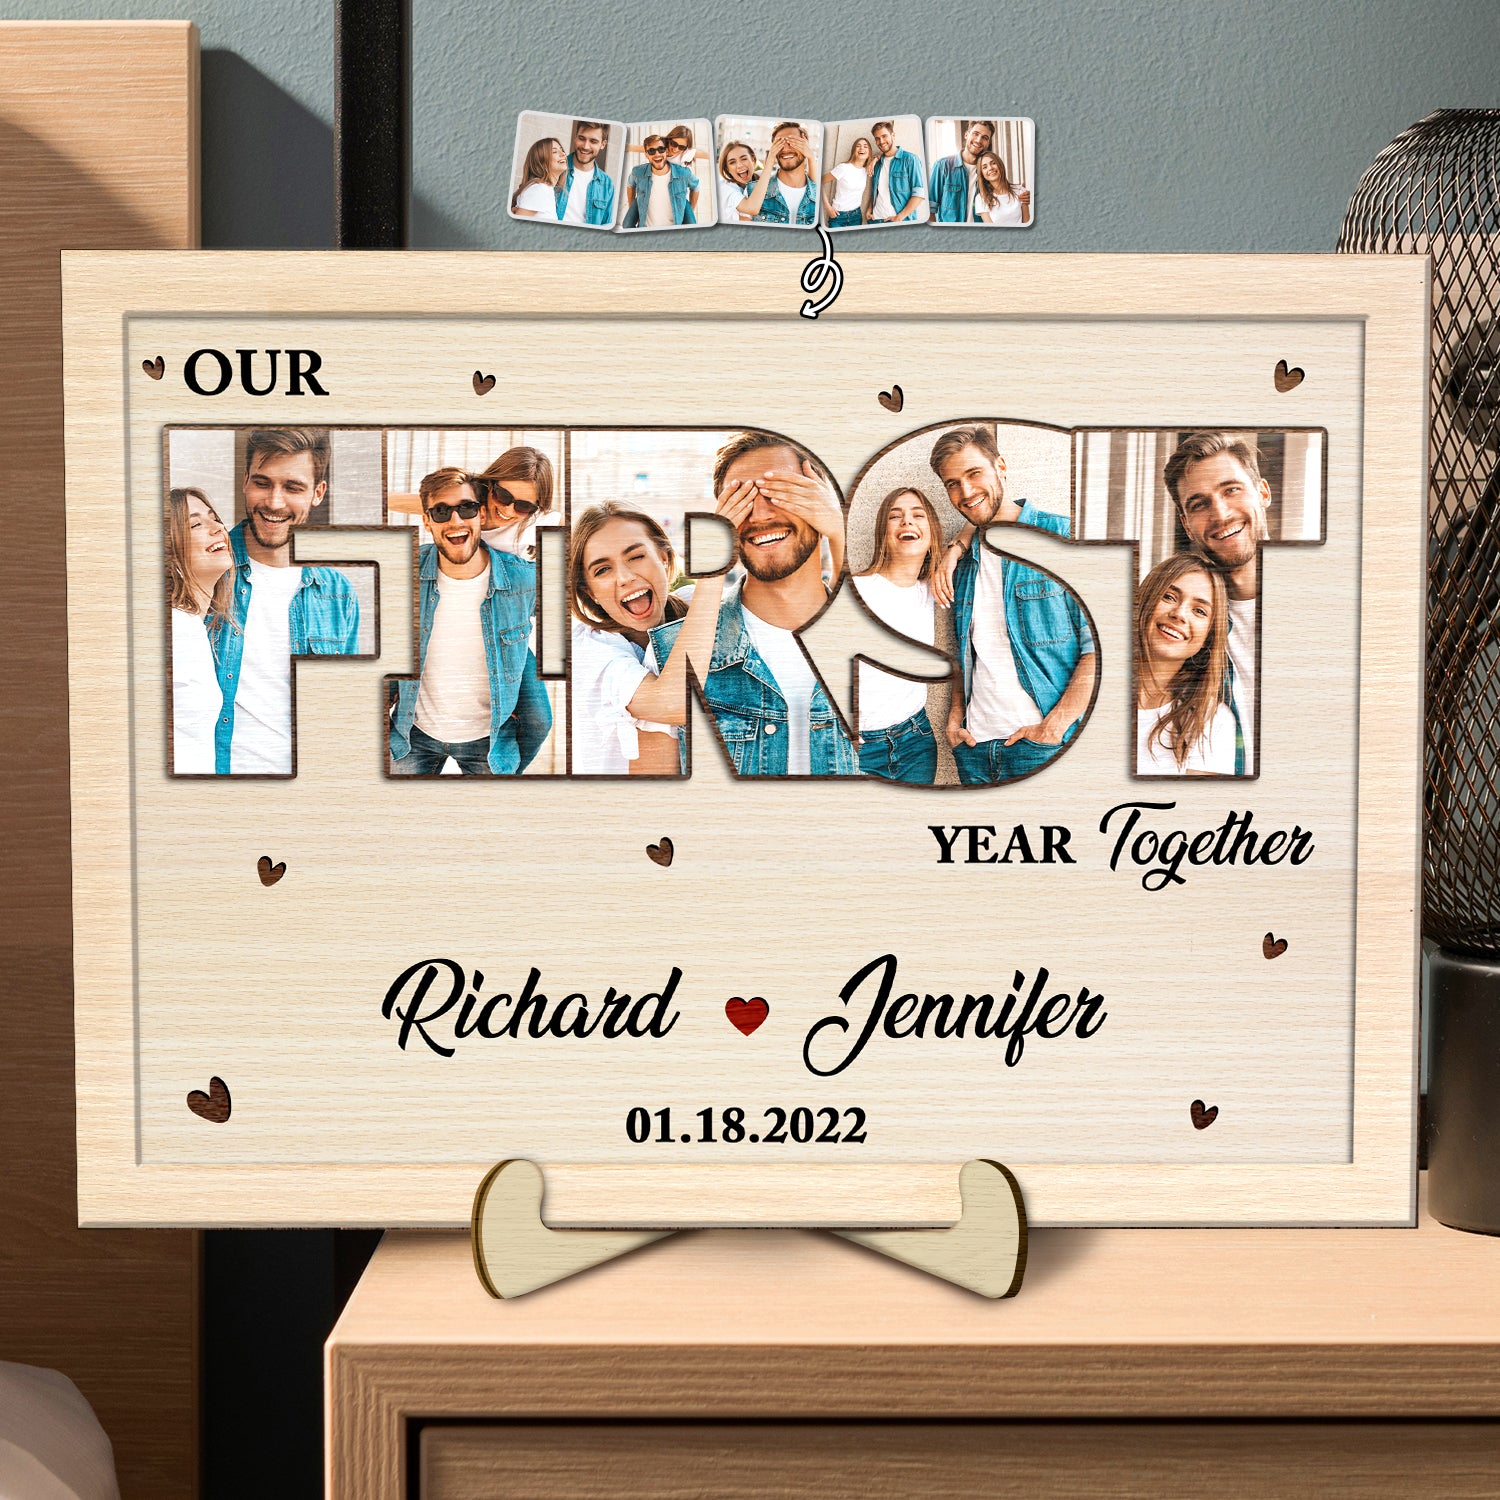 Custom Photo First Anniversary - Loving Gift For Couple, Spouse, Boyfriend, Girlfriend, Husband, Wife - Personalized 2-Layered Wooden Plaque With Stand